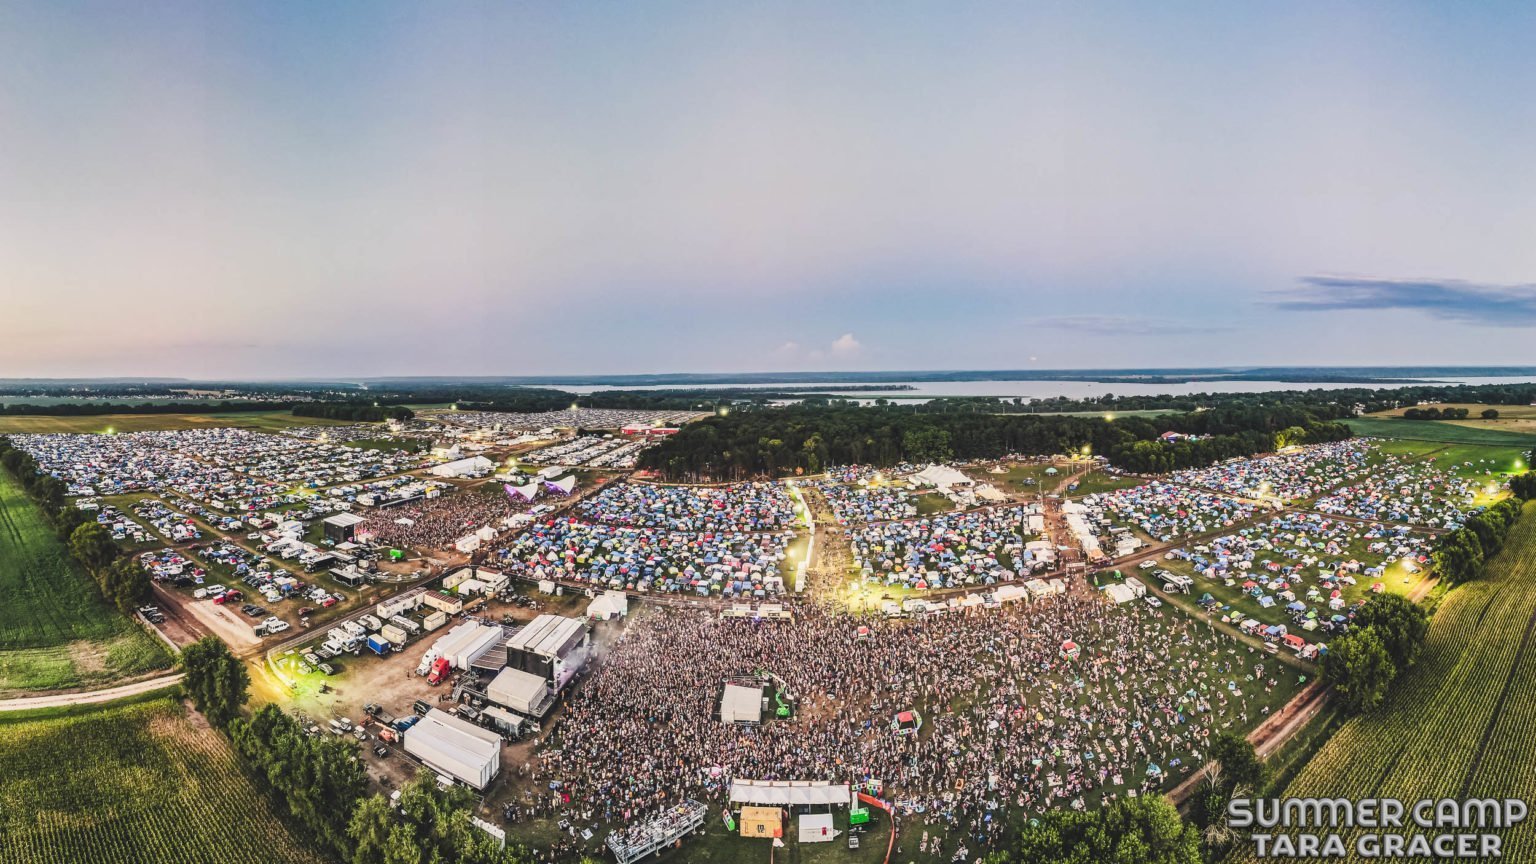 ABOUT Summer Camp Music Festival